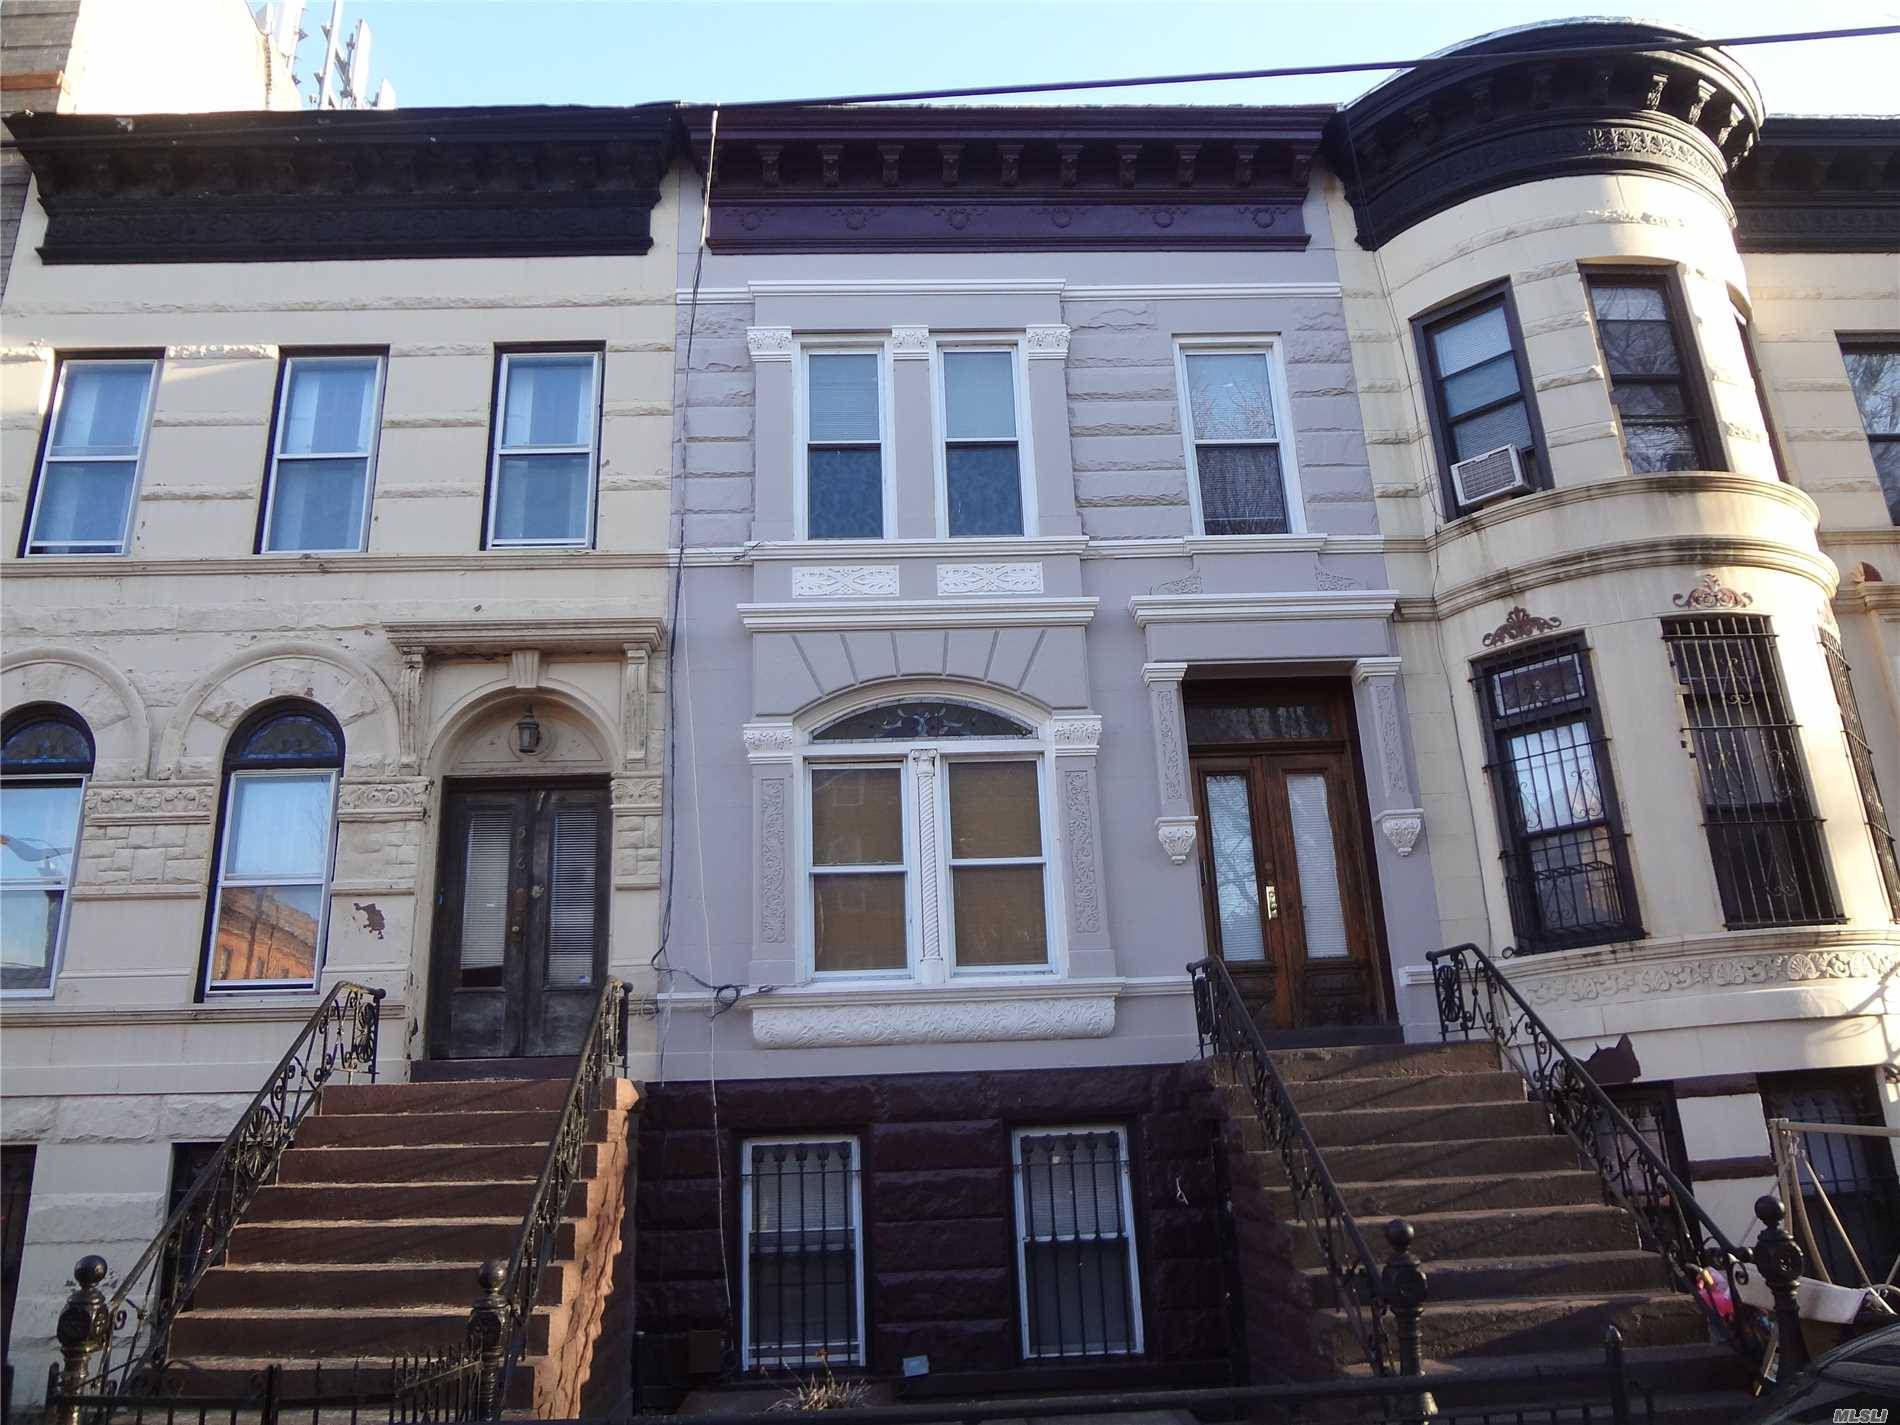 Brownstone Three Story, Two Family With Basement And Garden.